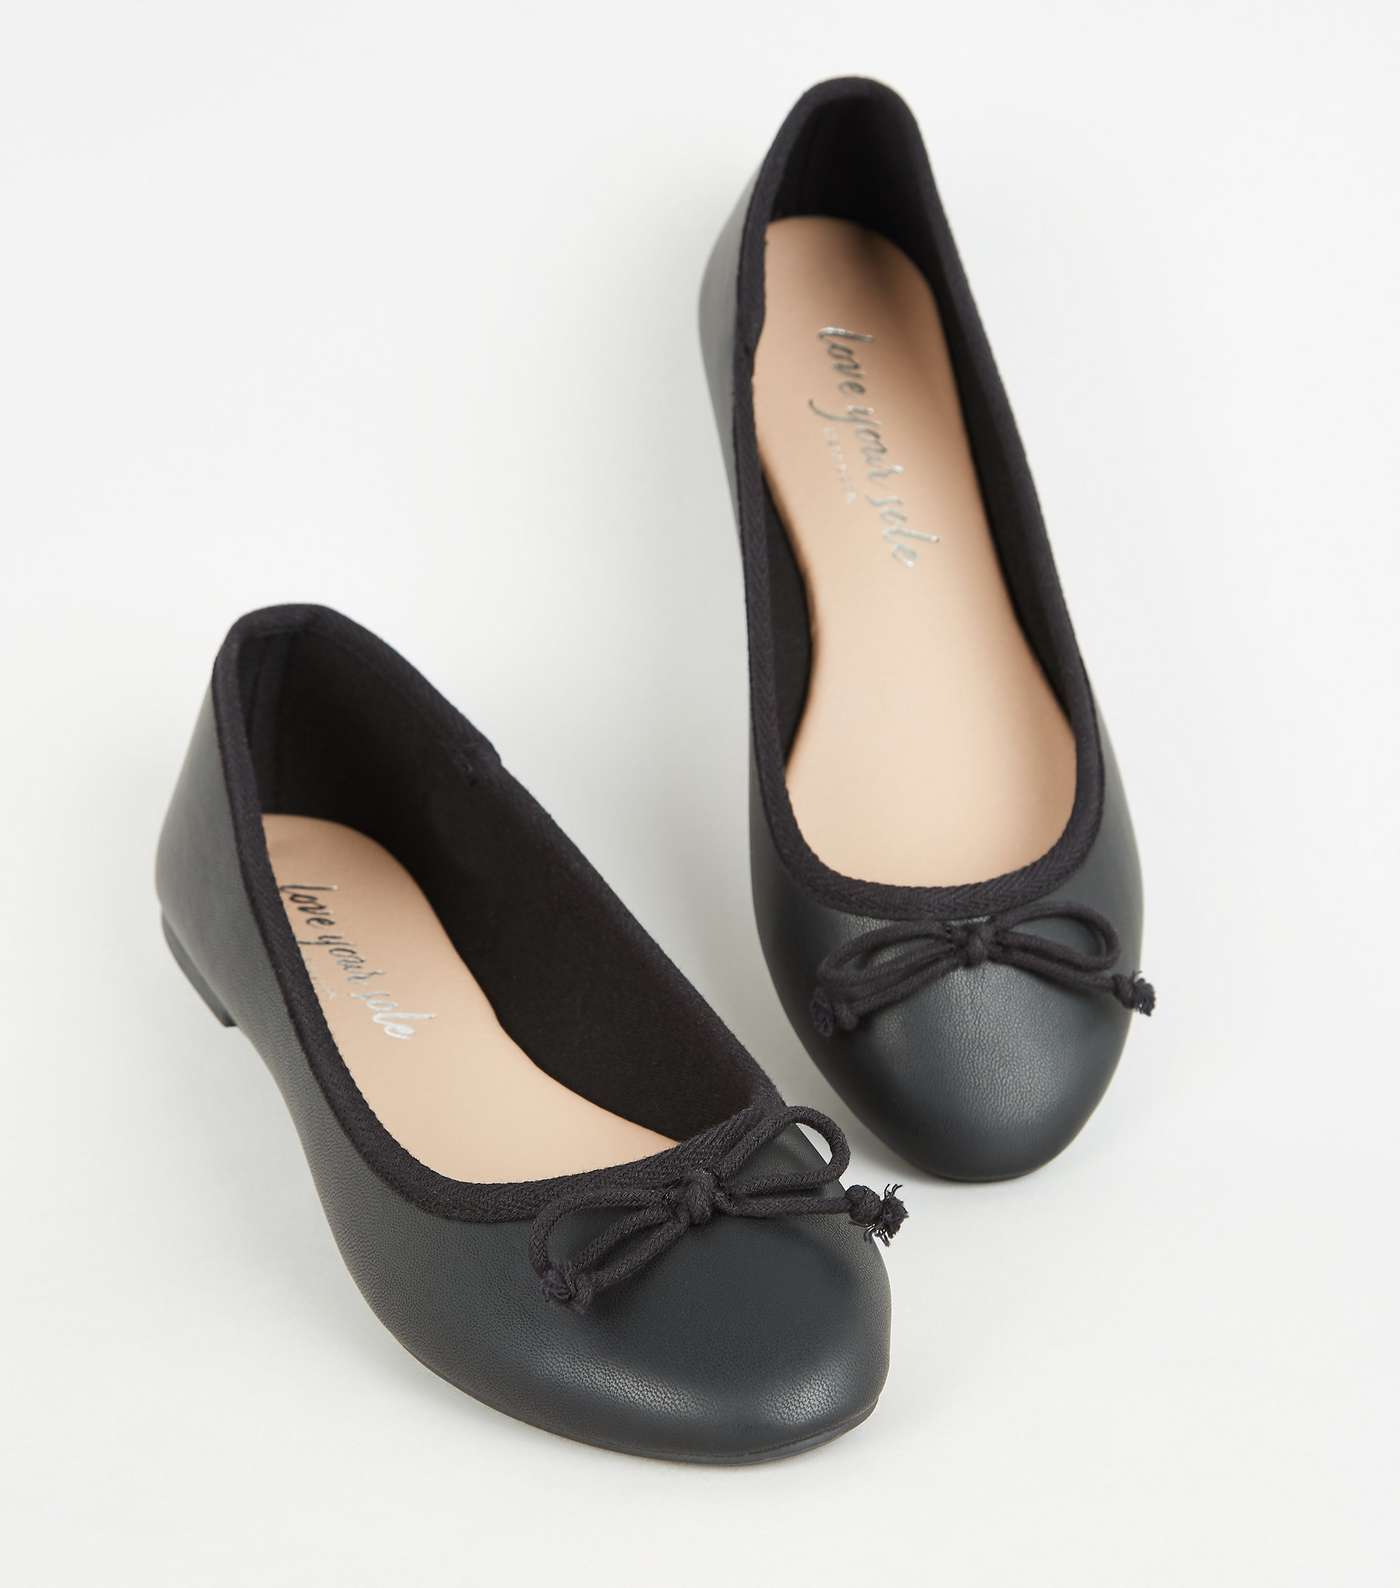 Black Leather-Look Bow Front Ballet Pumps Image 3